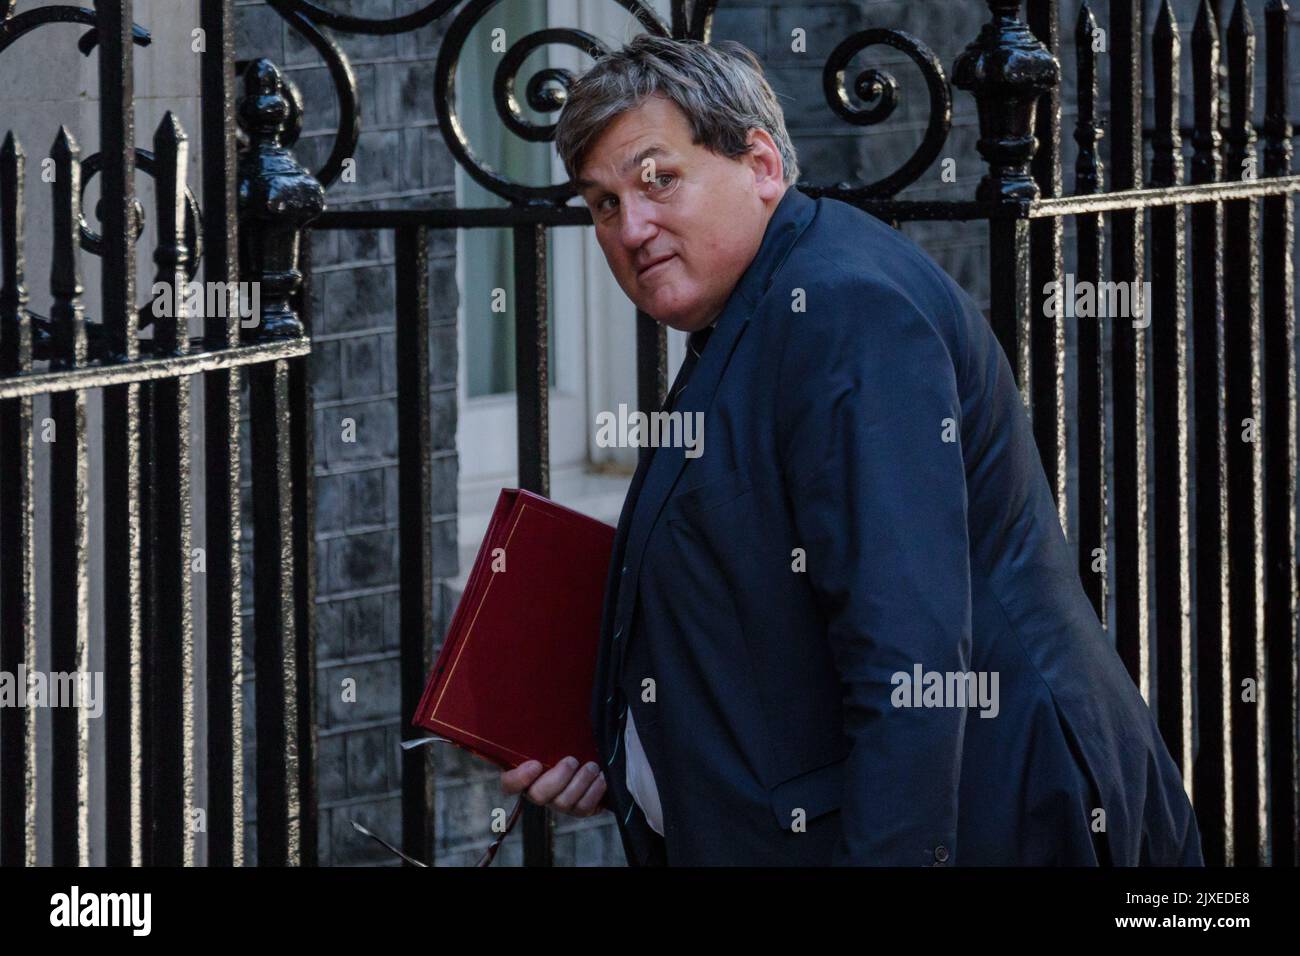 Downing Street, London, UK. 7th Sep, 2022. Ministers attend the first Cabinet Meeting at 10 Downing Street since Prime Minister Liz Truss appointed them last night. Kit Malthouse, Secretary of State for Education. Credit: amanda rose/Alamy Live News Stock Photo